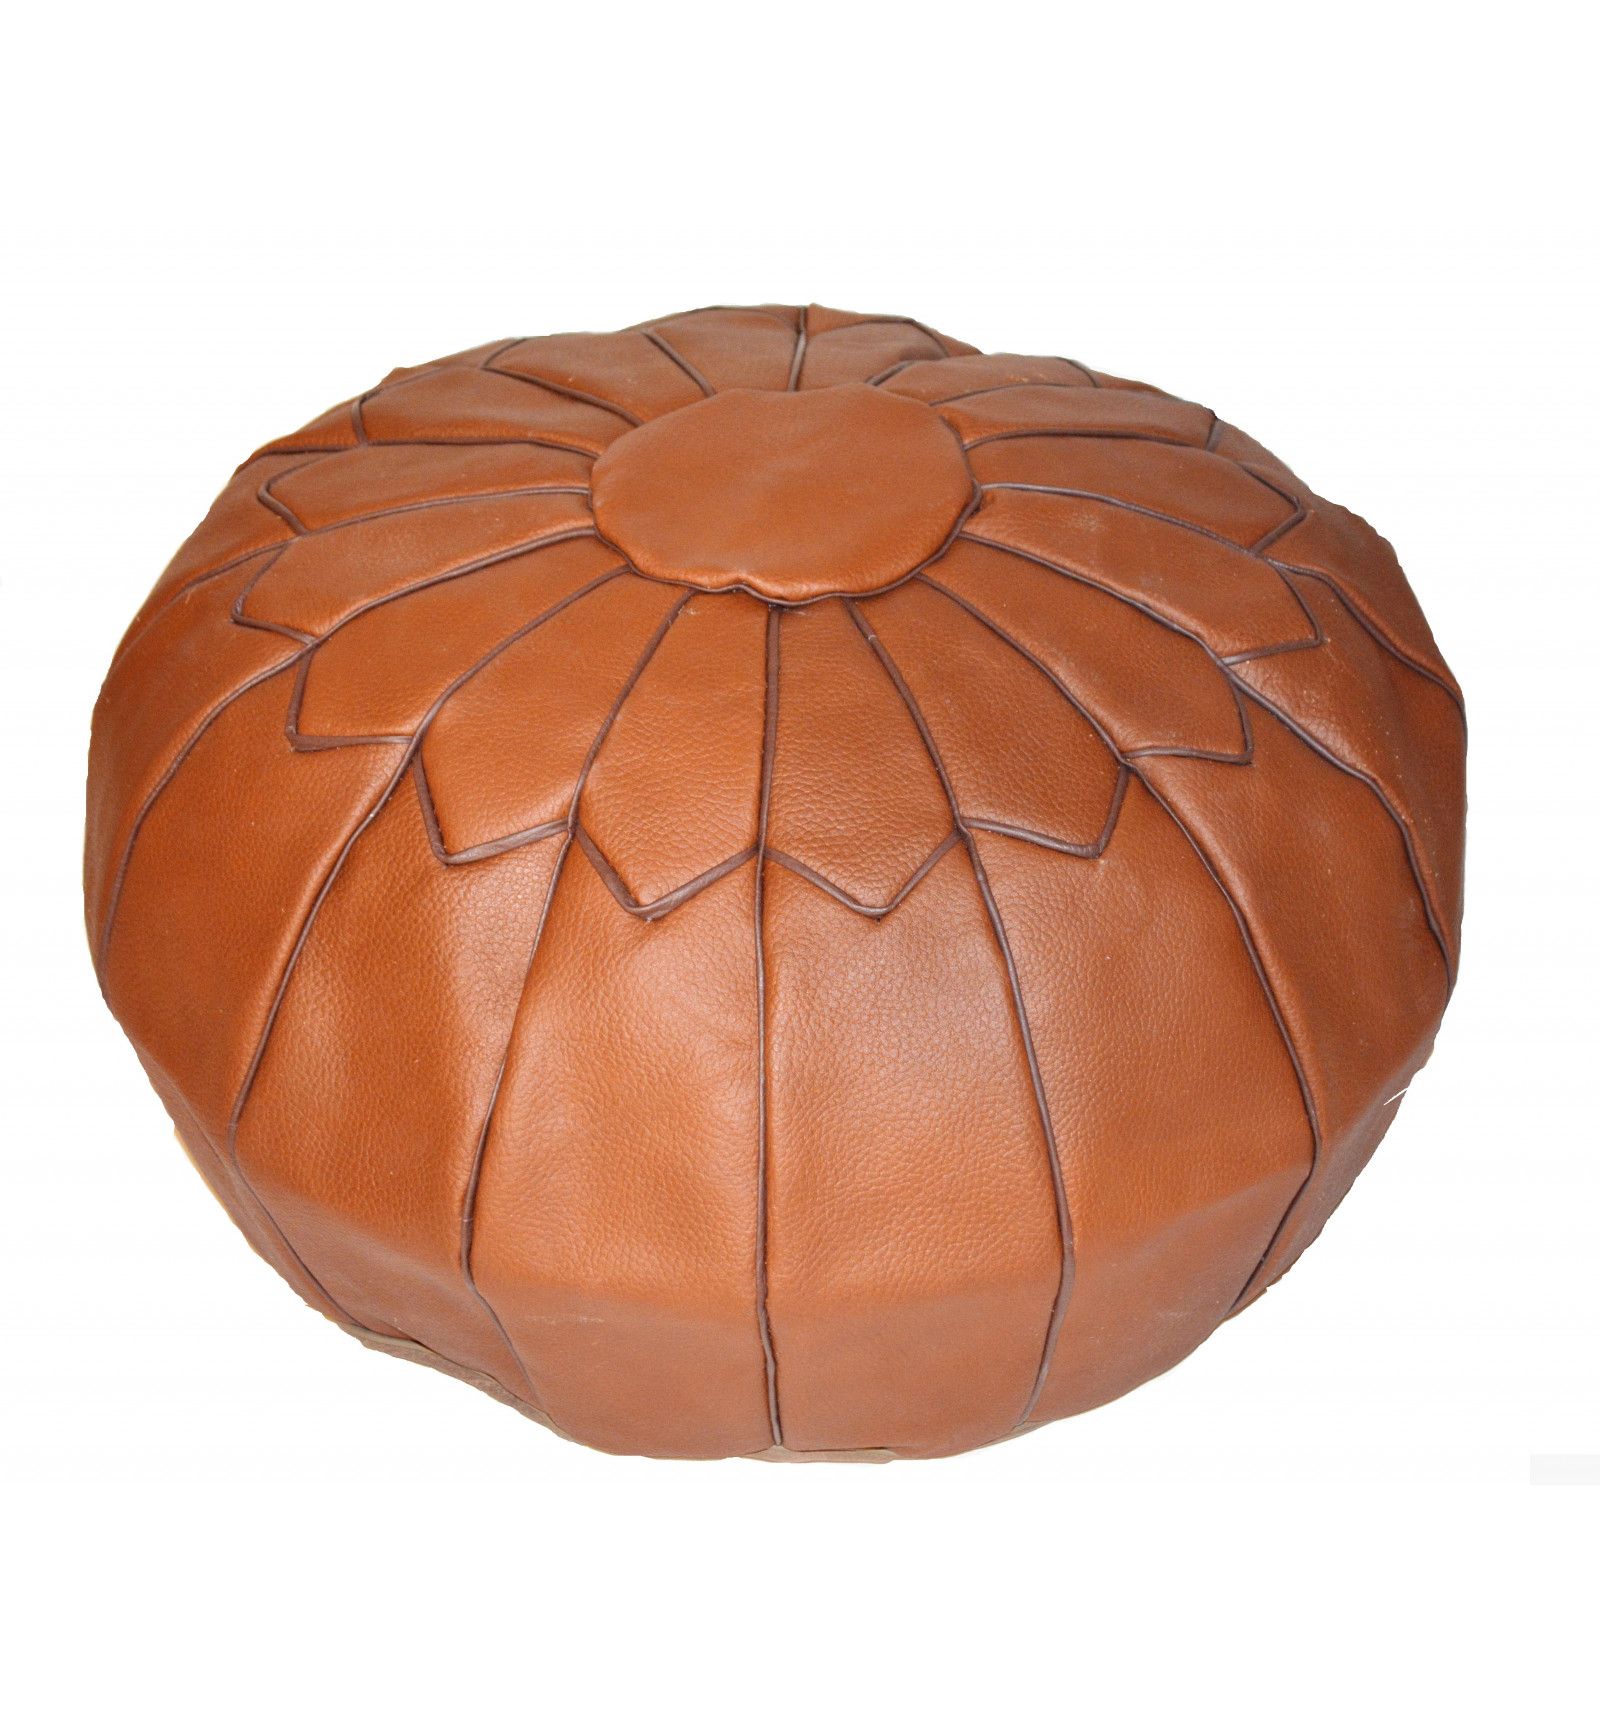 Leather Pouf – Round Leather Ottoman Brown Pertaining To Dark Brown Leather Pouf Ottomans (View 11 of 20)